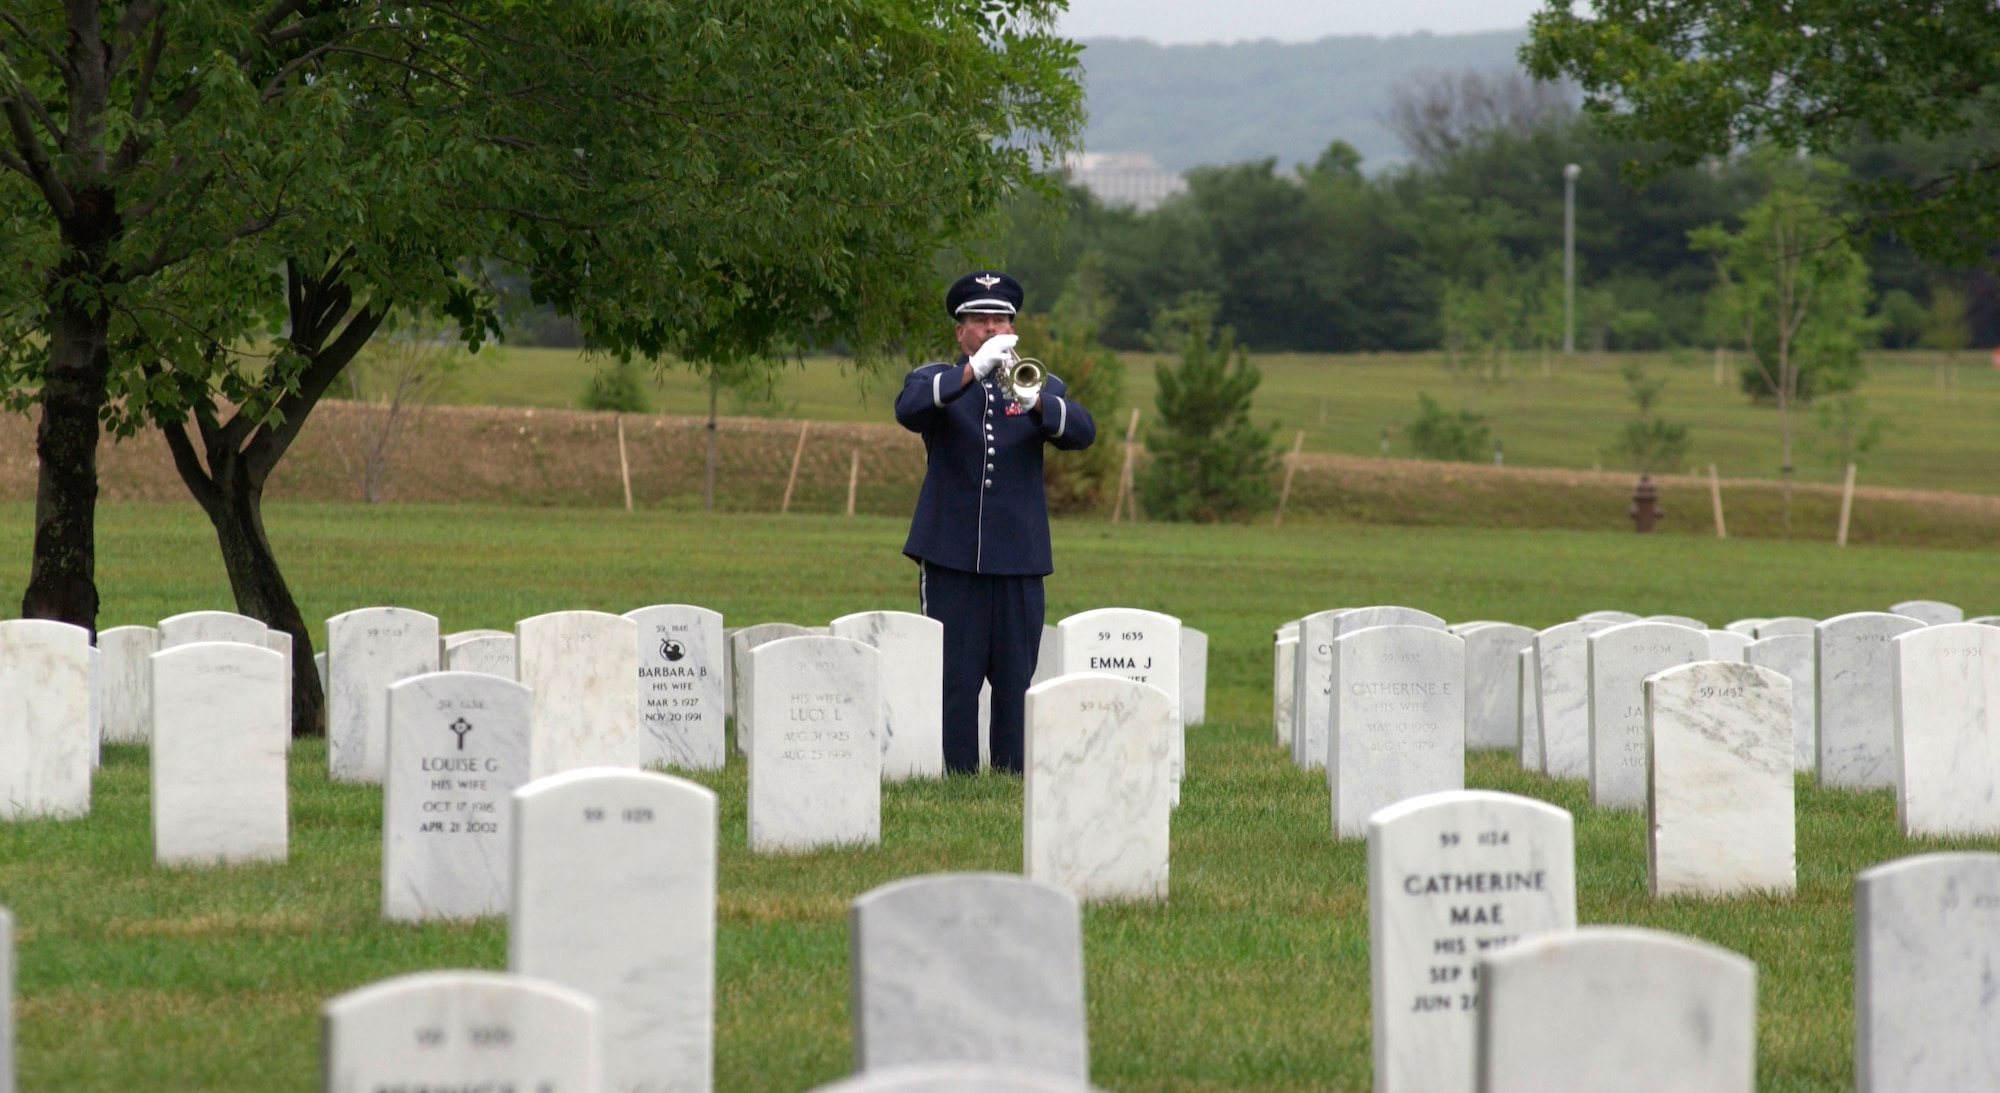 Master Sgt. Robert Connolly plays "Taps" during the remembrance ceremony for the Khobar Towers bombing on Sunday, June 25, at Arlington National Cemetery, Va. Family members and friends of the 19 Airmen killed in the terrorist bombing at Dhahran Air Base, Saudi Arabia, on June 25, 1996, gathered for the ceremony. Sergeant Connolly is a member of the Air Force Band at Bolling Air Force Base, D.C.  (U.S. Air Force photo/Tech. Sgt. Cohen A. Young)